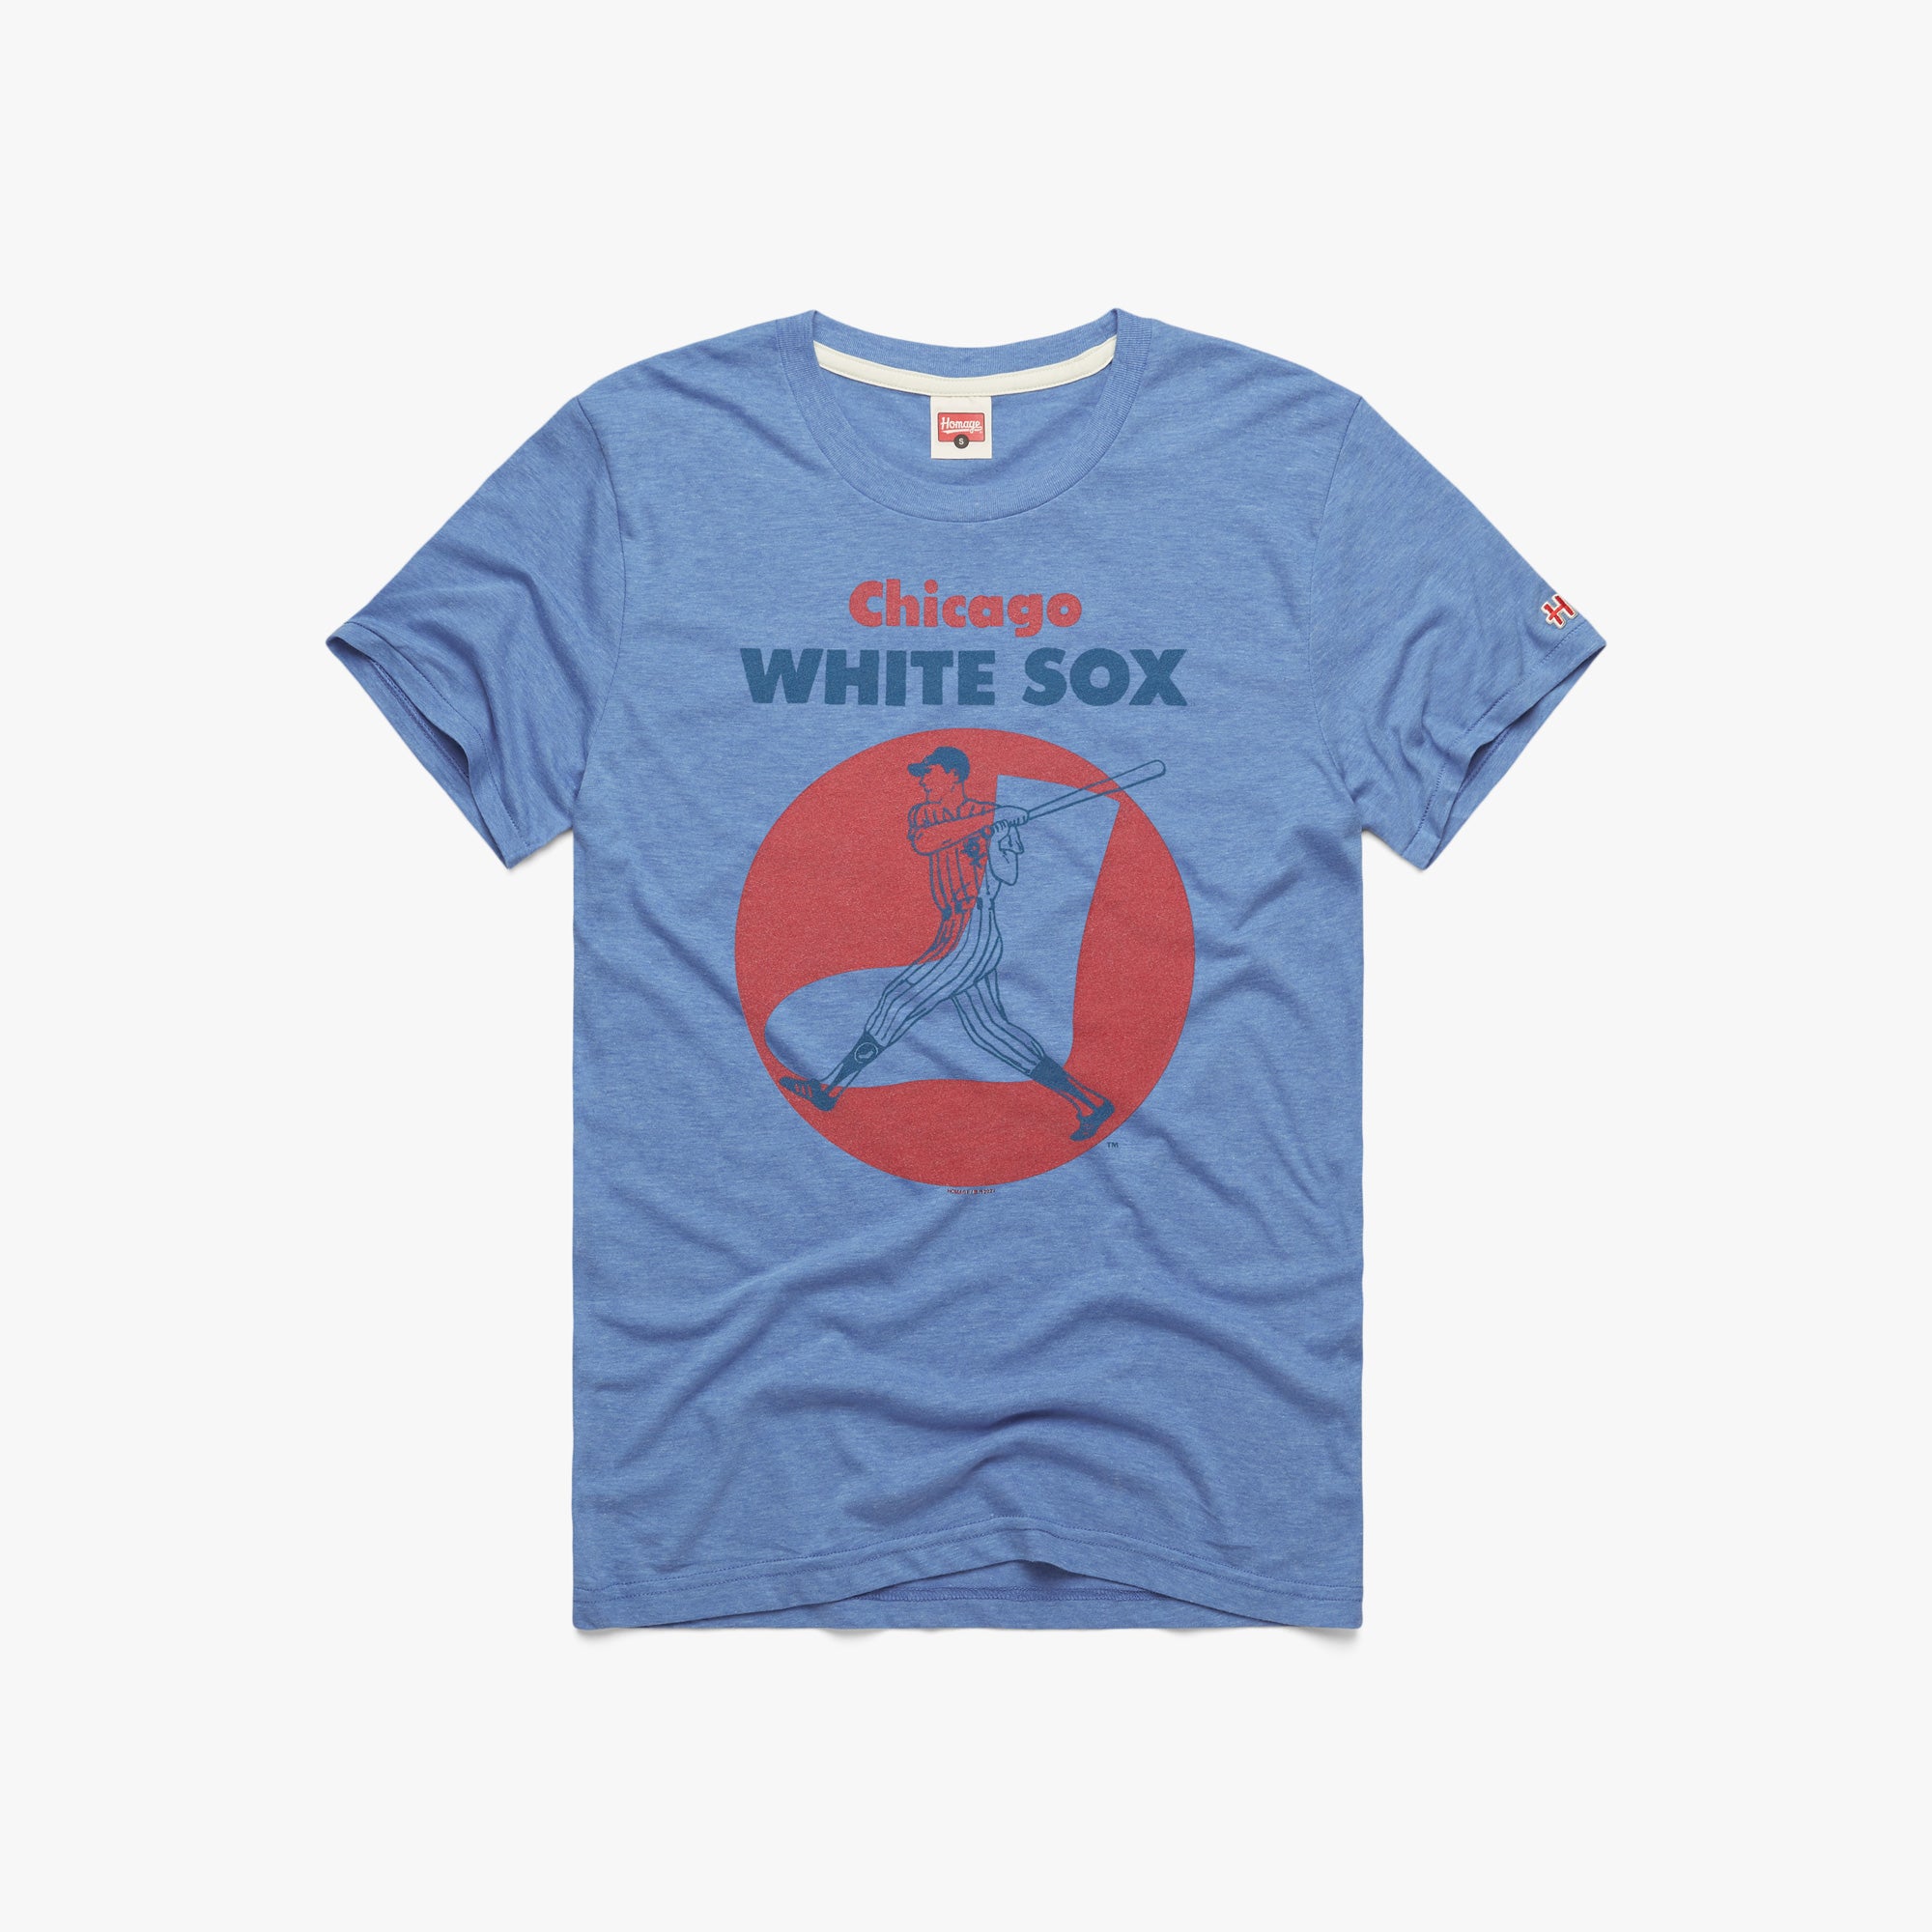 Chicago White Sox Vintage Swing